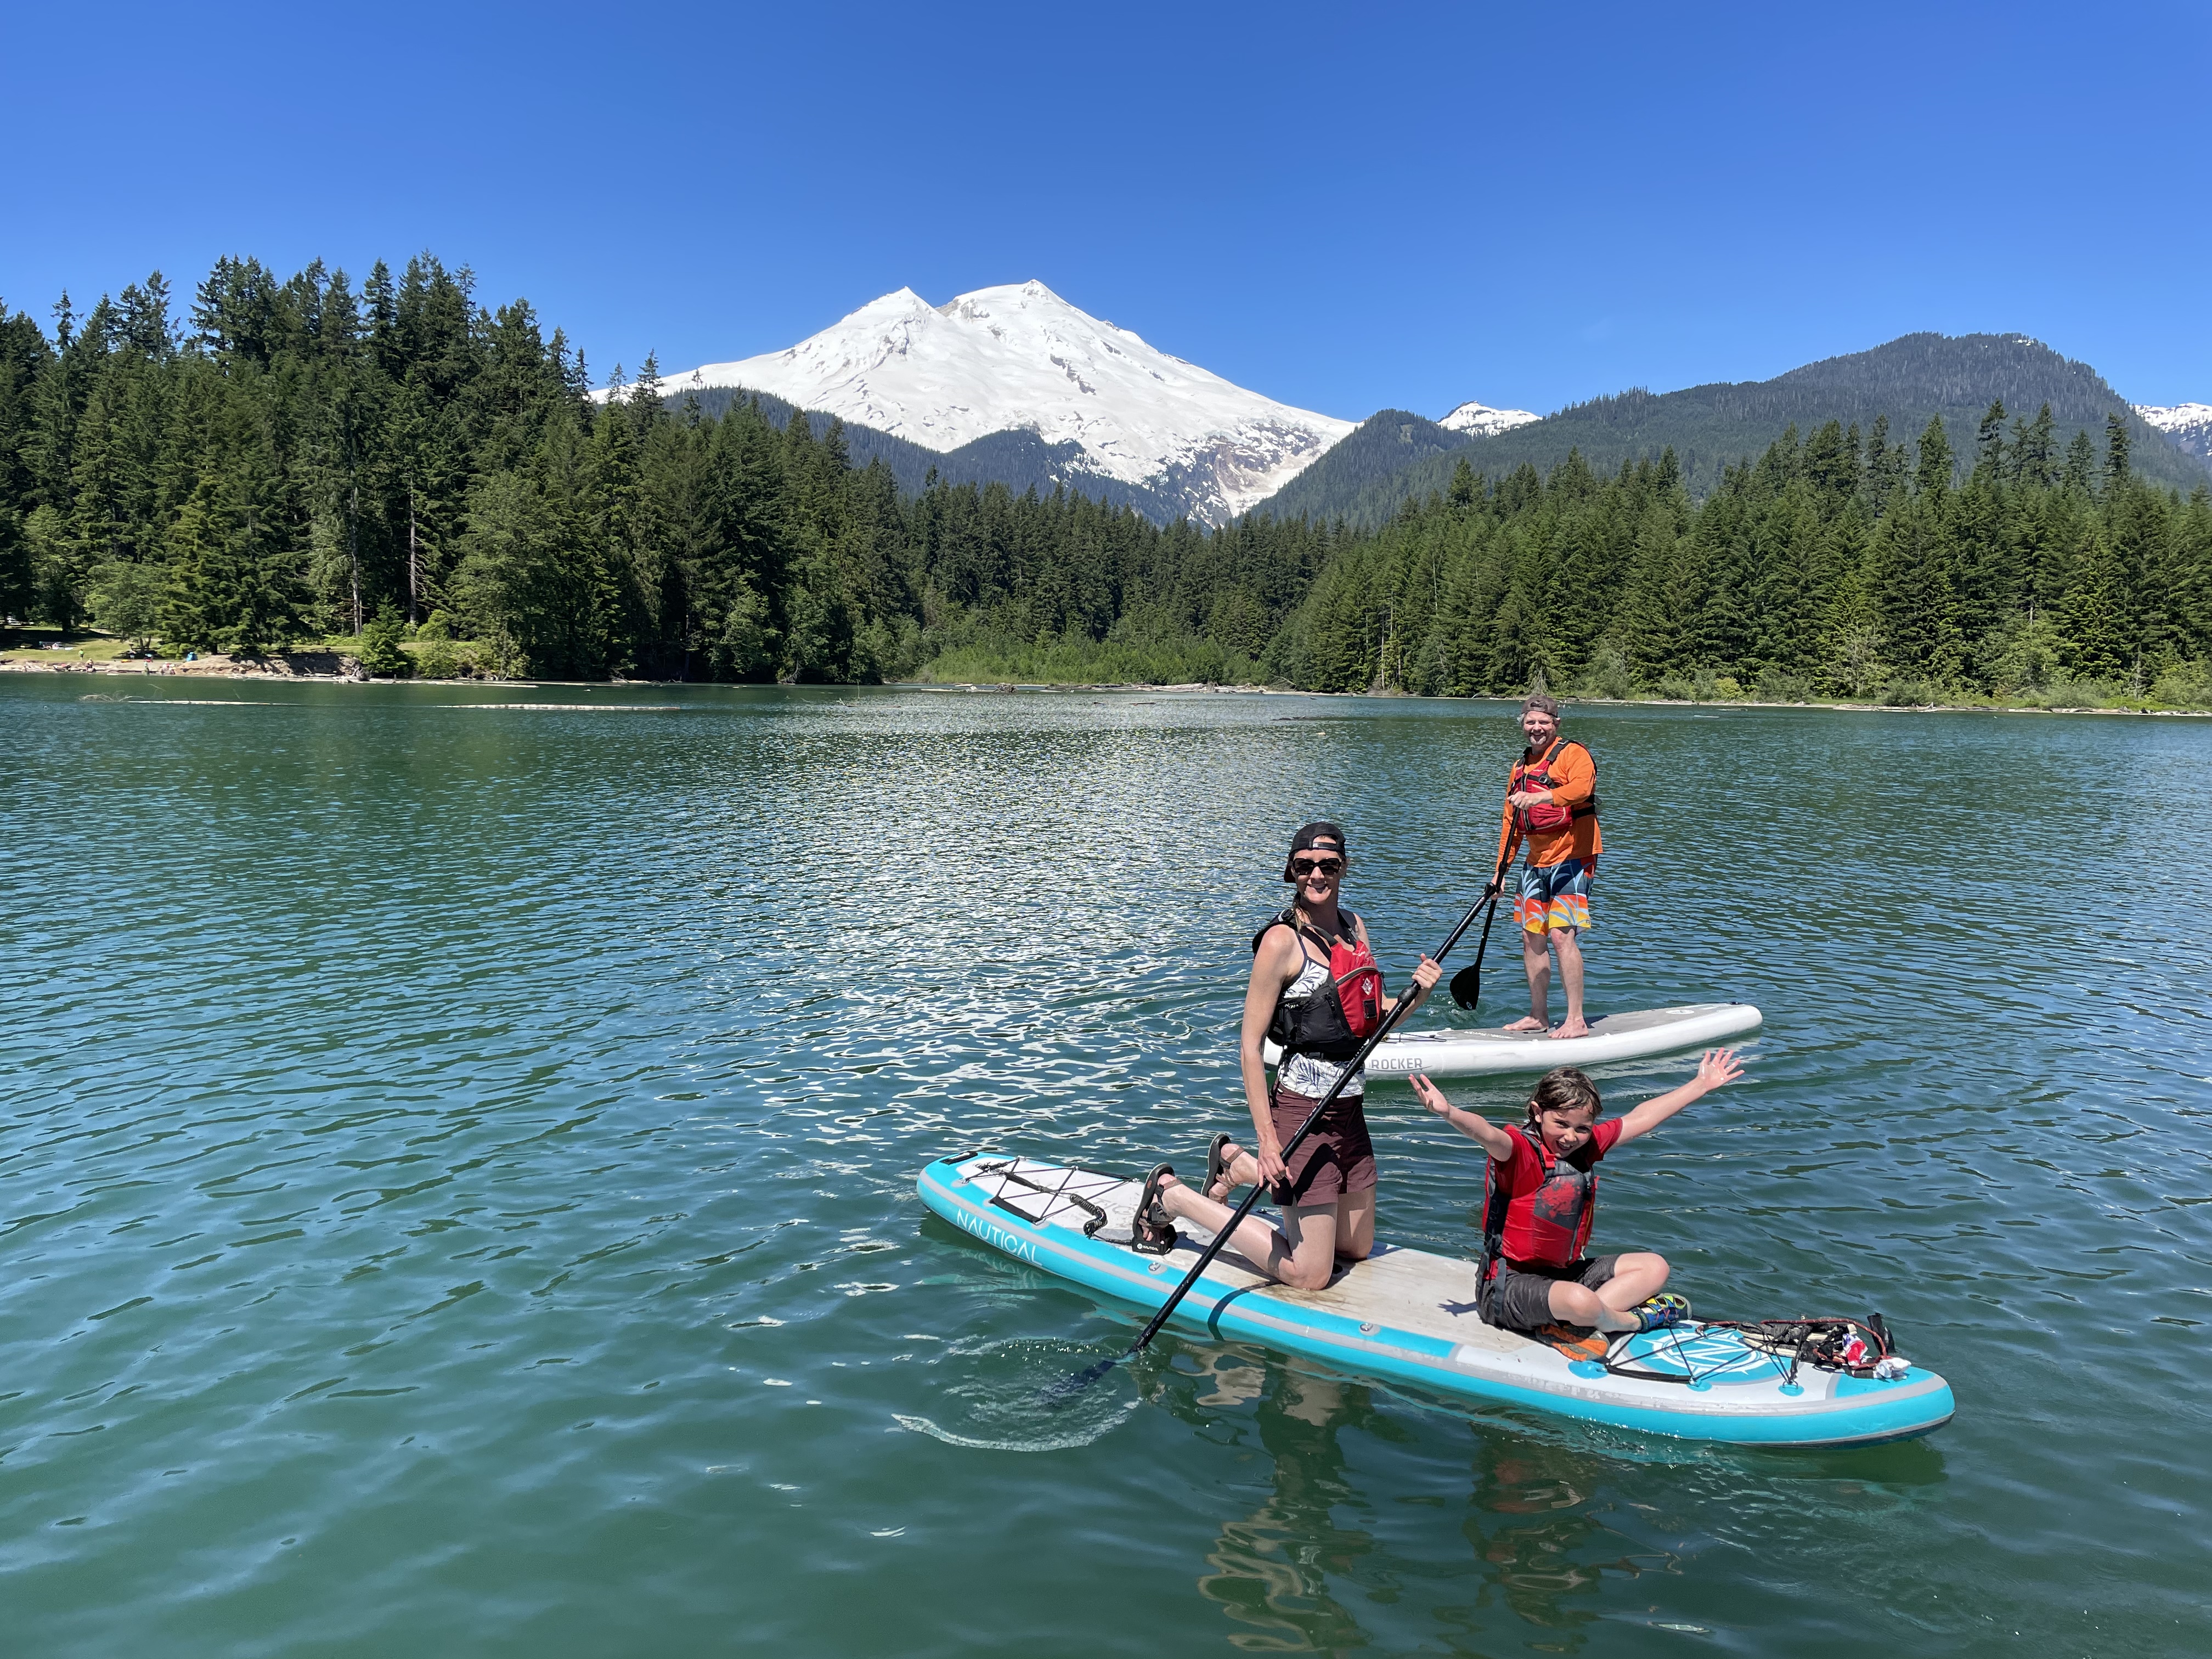 Woman and boy on paddle board and man on paddle board on a lake with a mountain and forest in the background